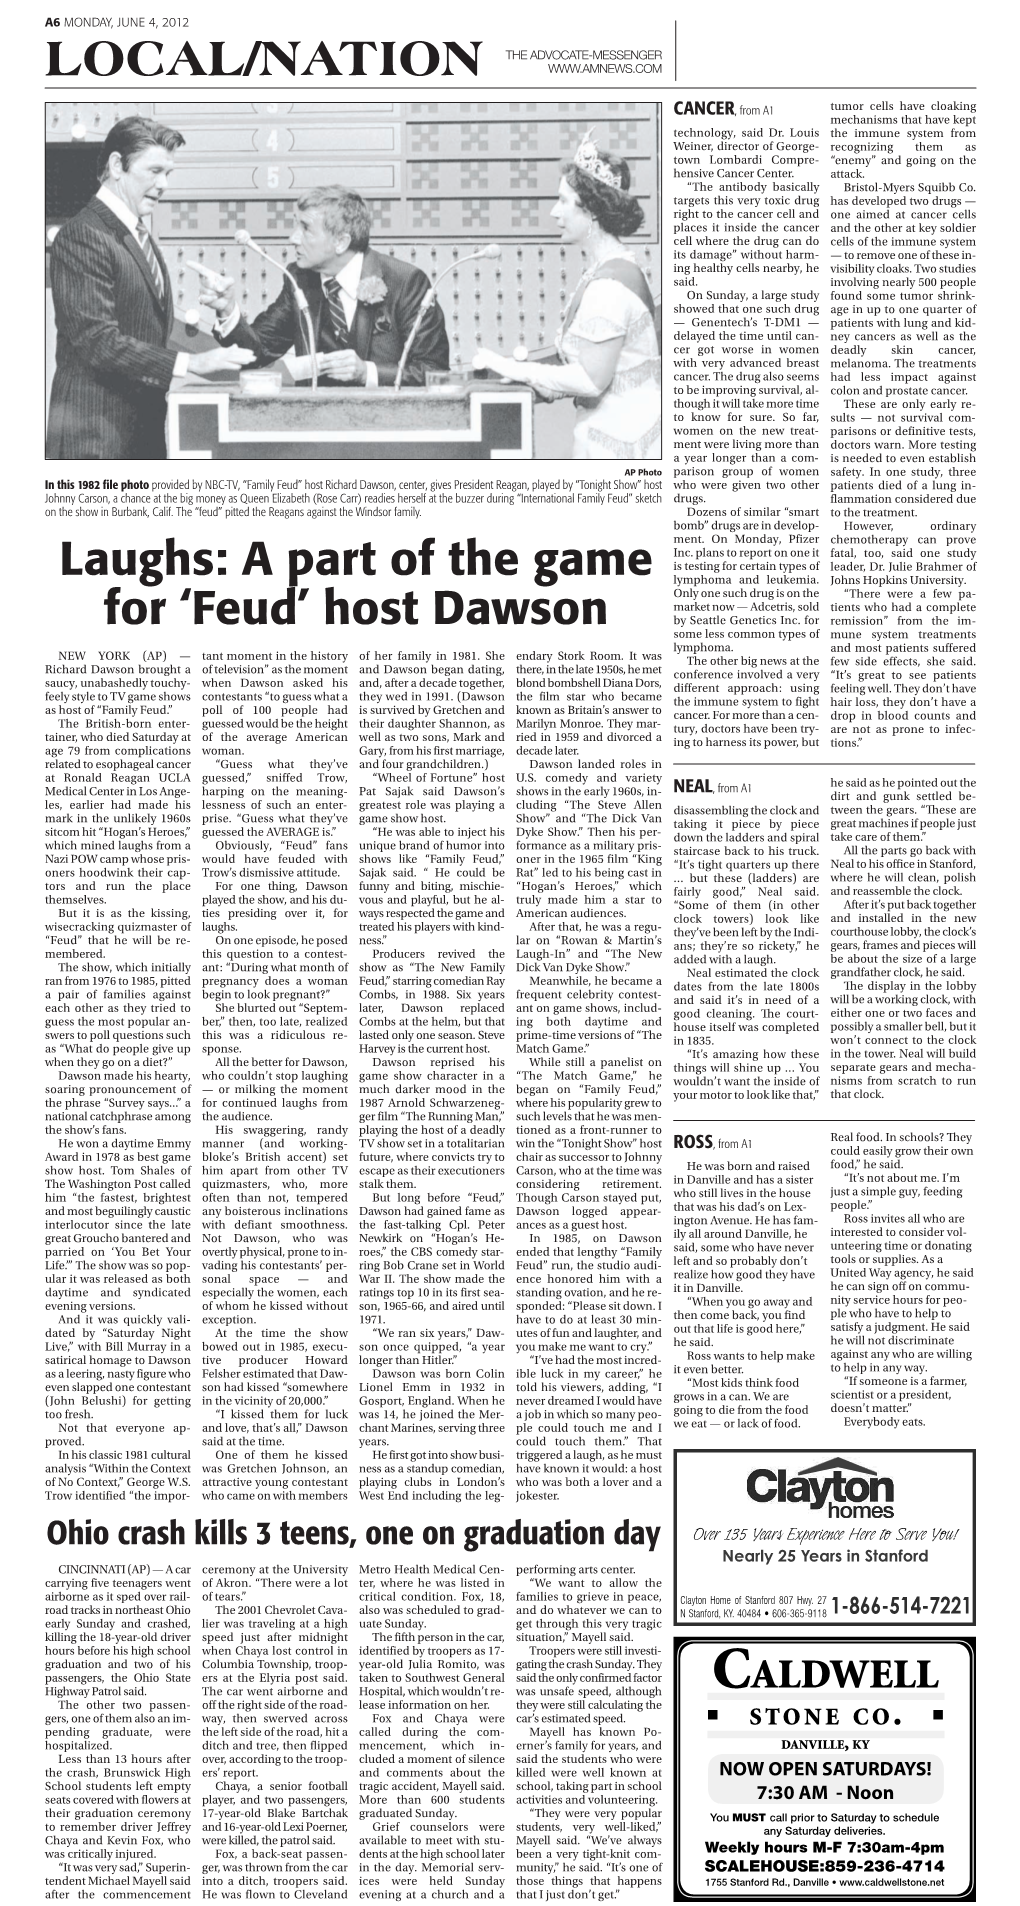 Laughs: a Part of the Game for 'Feud' Host Dawson